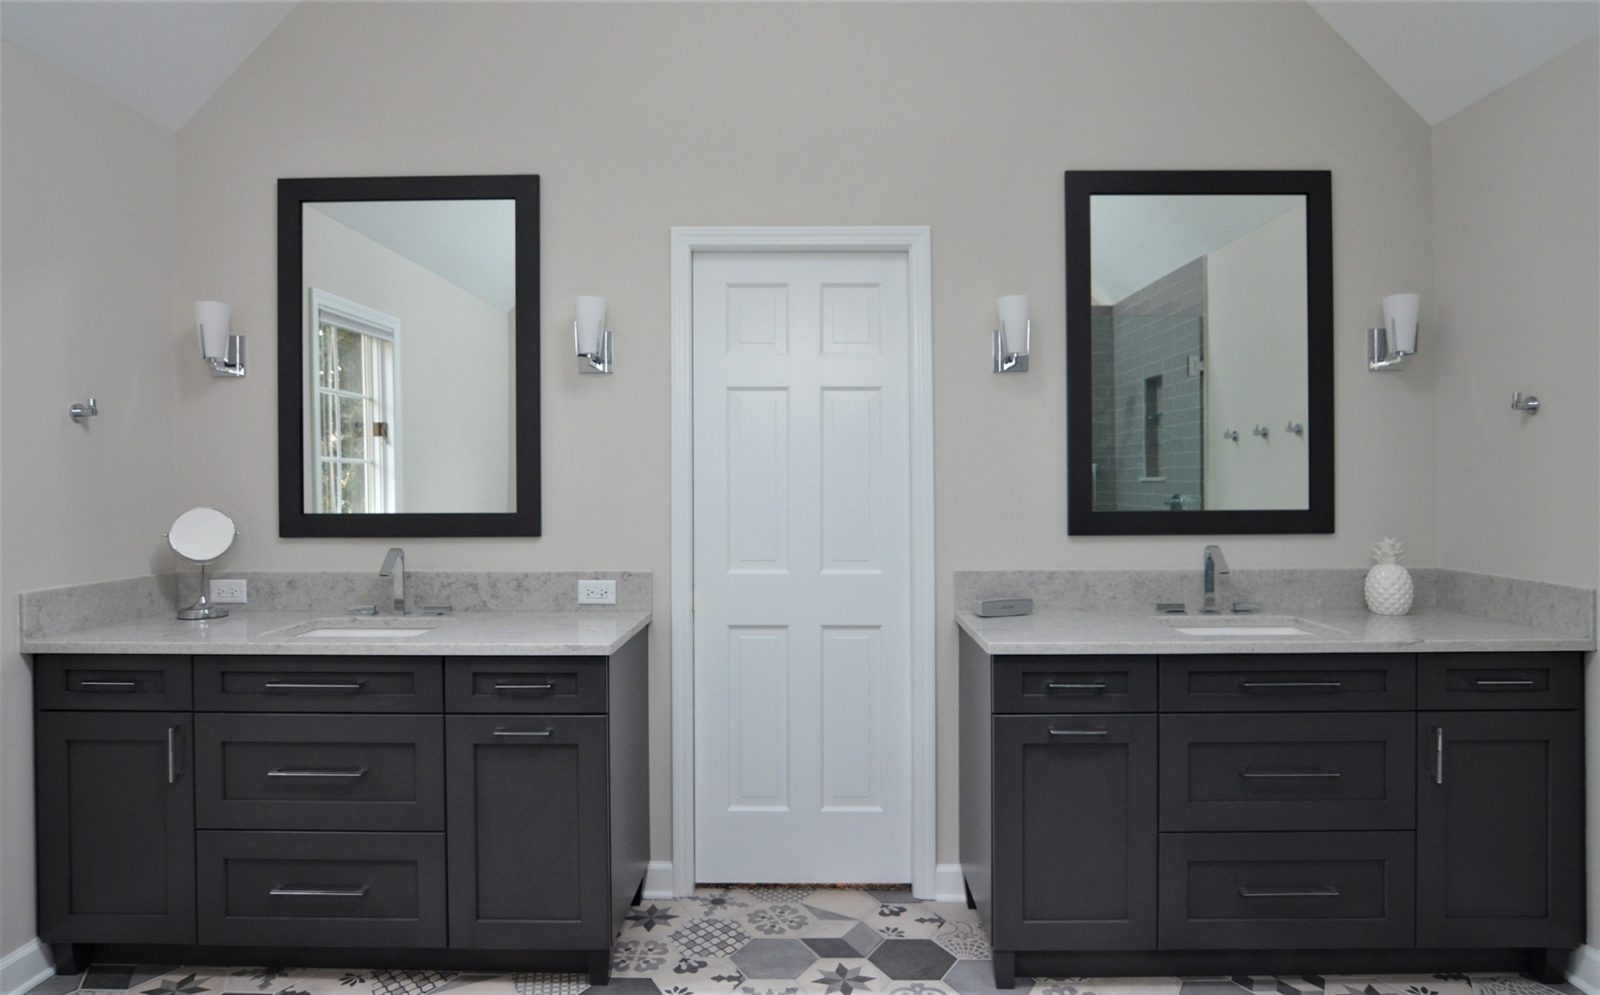 Two separate bathroom sinks and cabinets with a door between them